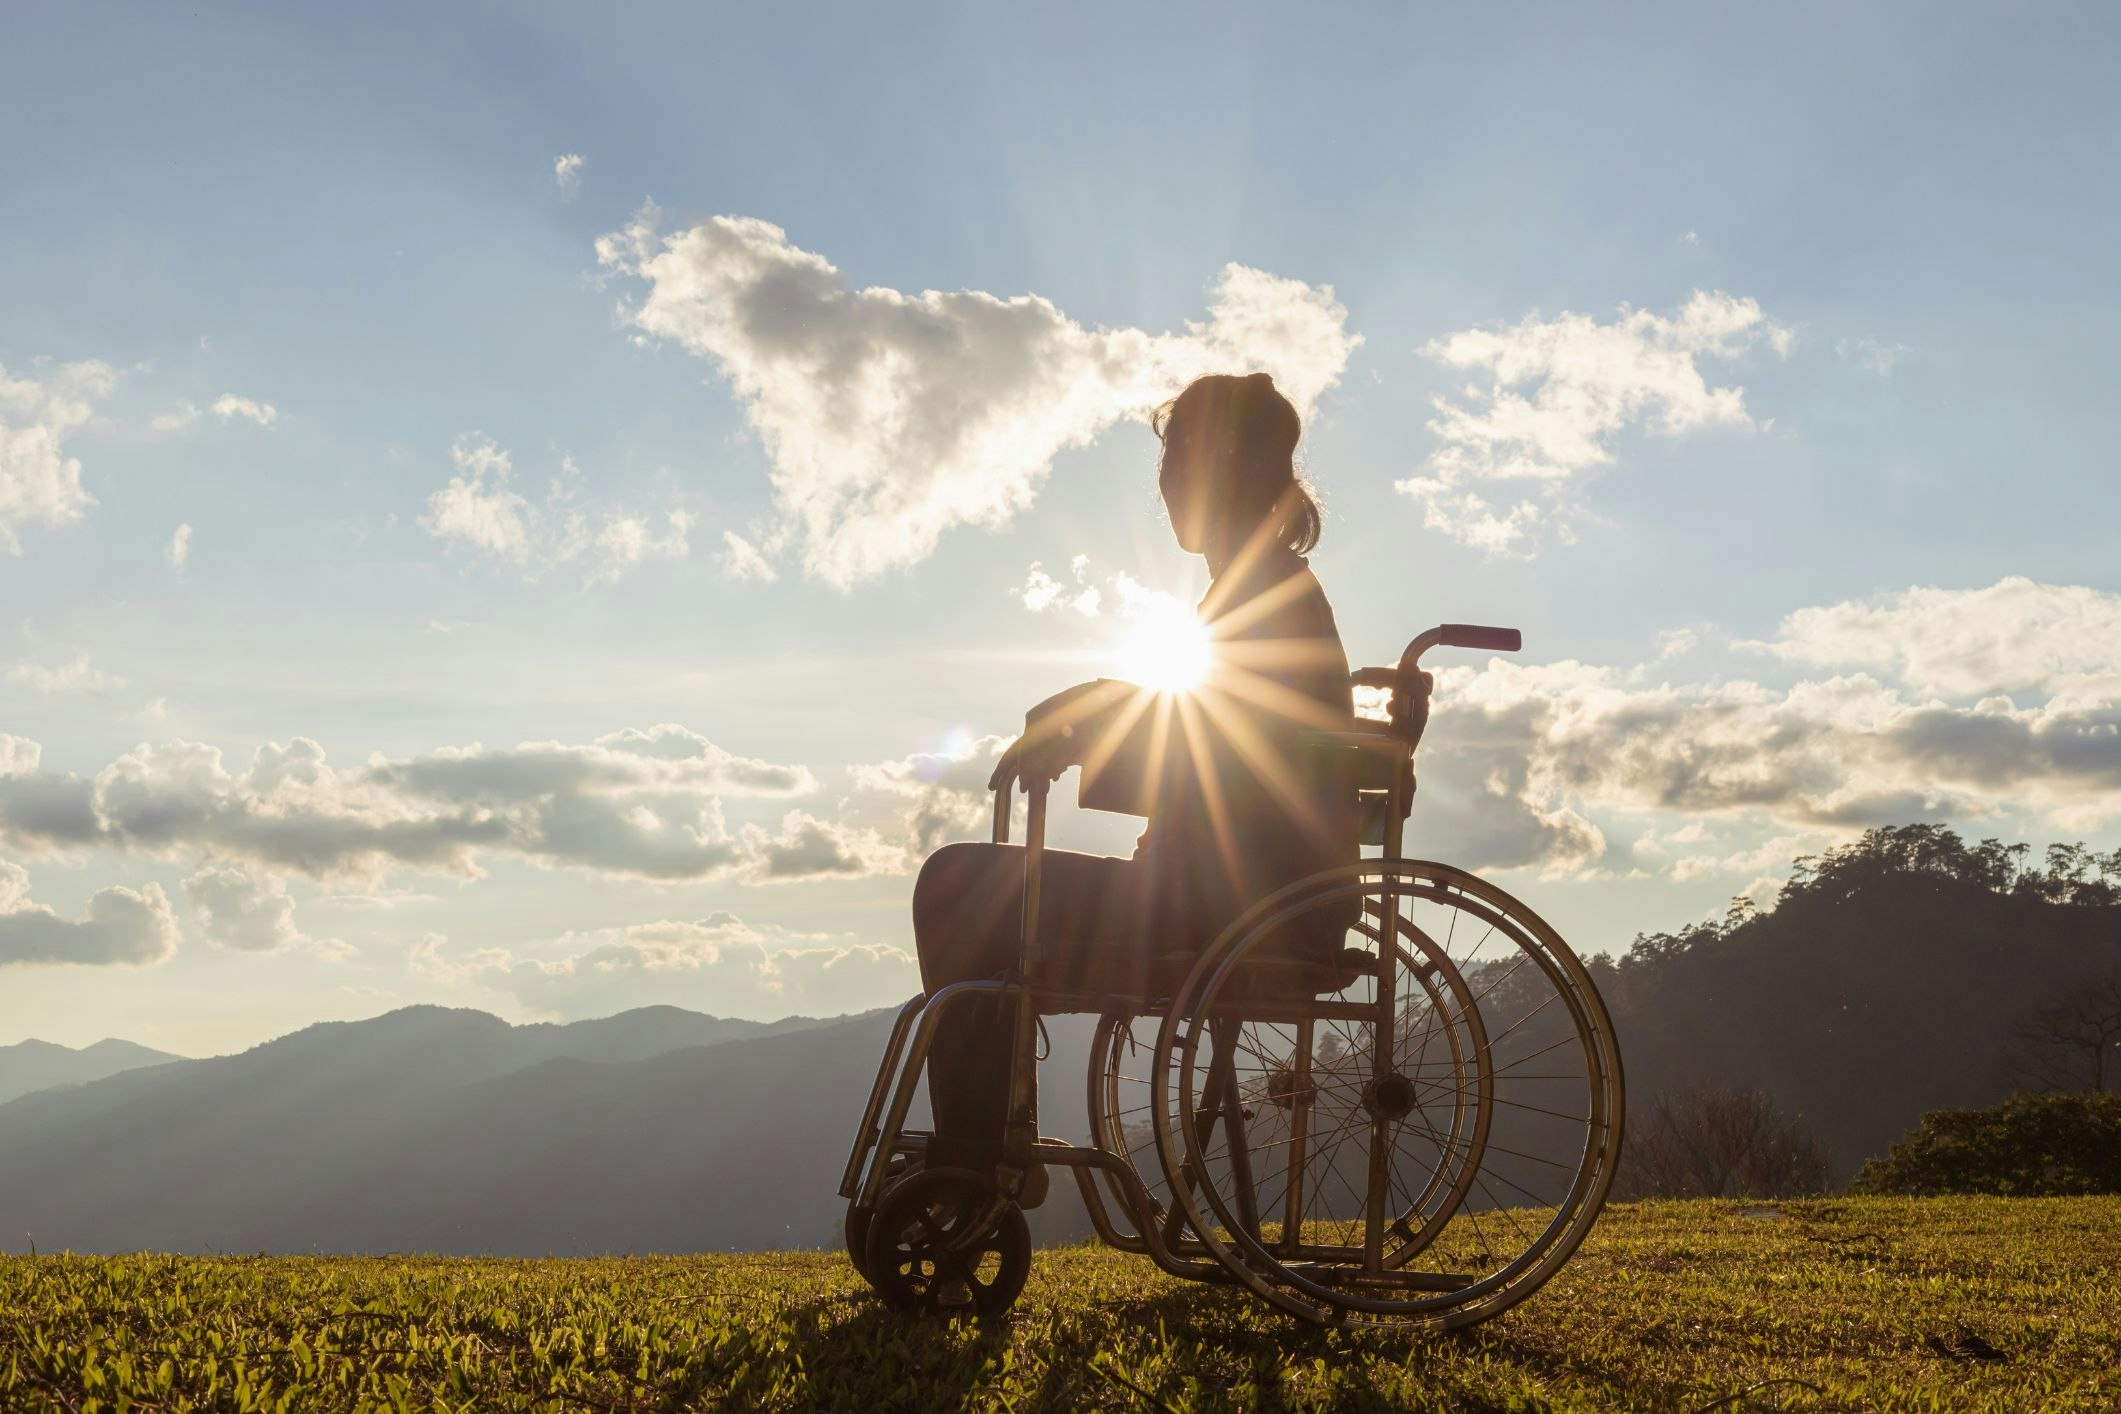 <p>When should you check in with someone who lives with disability? [Source: Shutterstock]</p>
